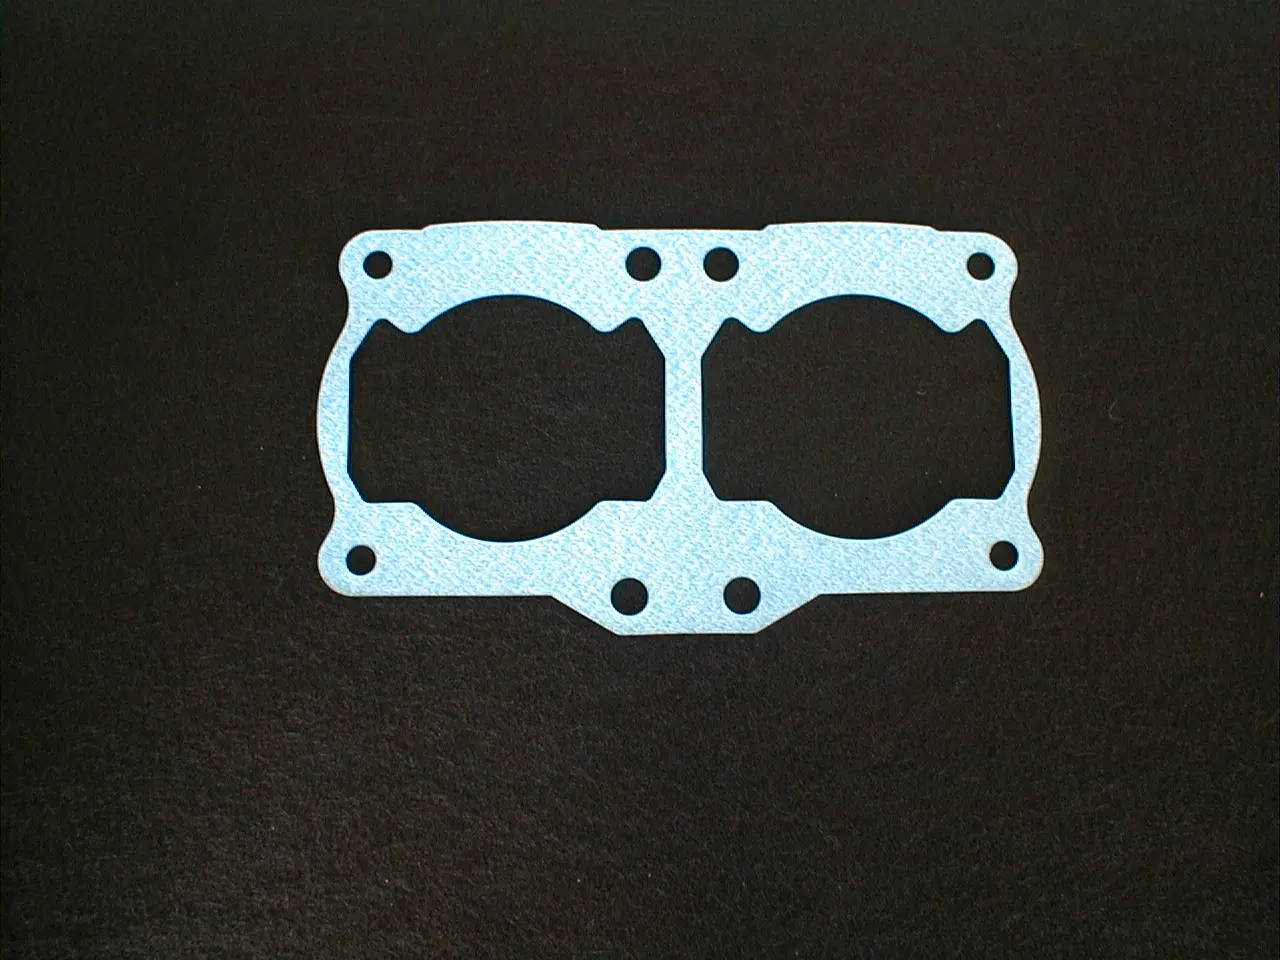 A blue gasket on a black surface, specifically the 1 Piece RZ 350/Banshee base gasket with part number 15-5701.